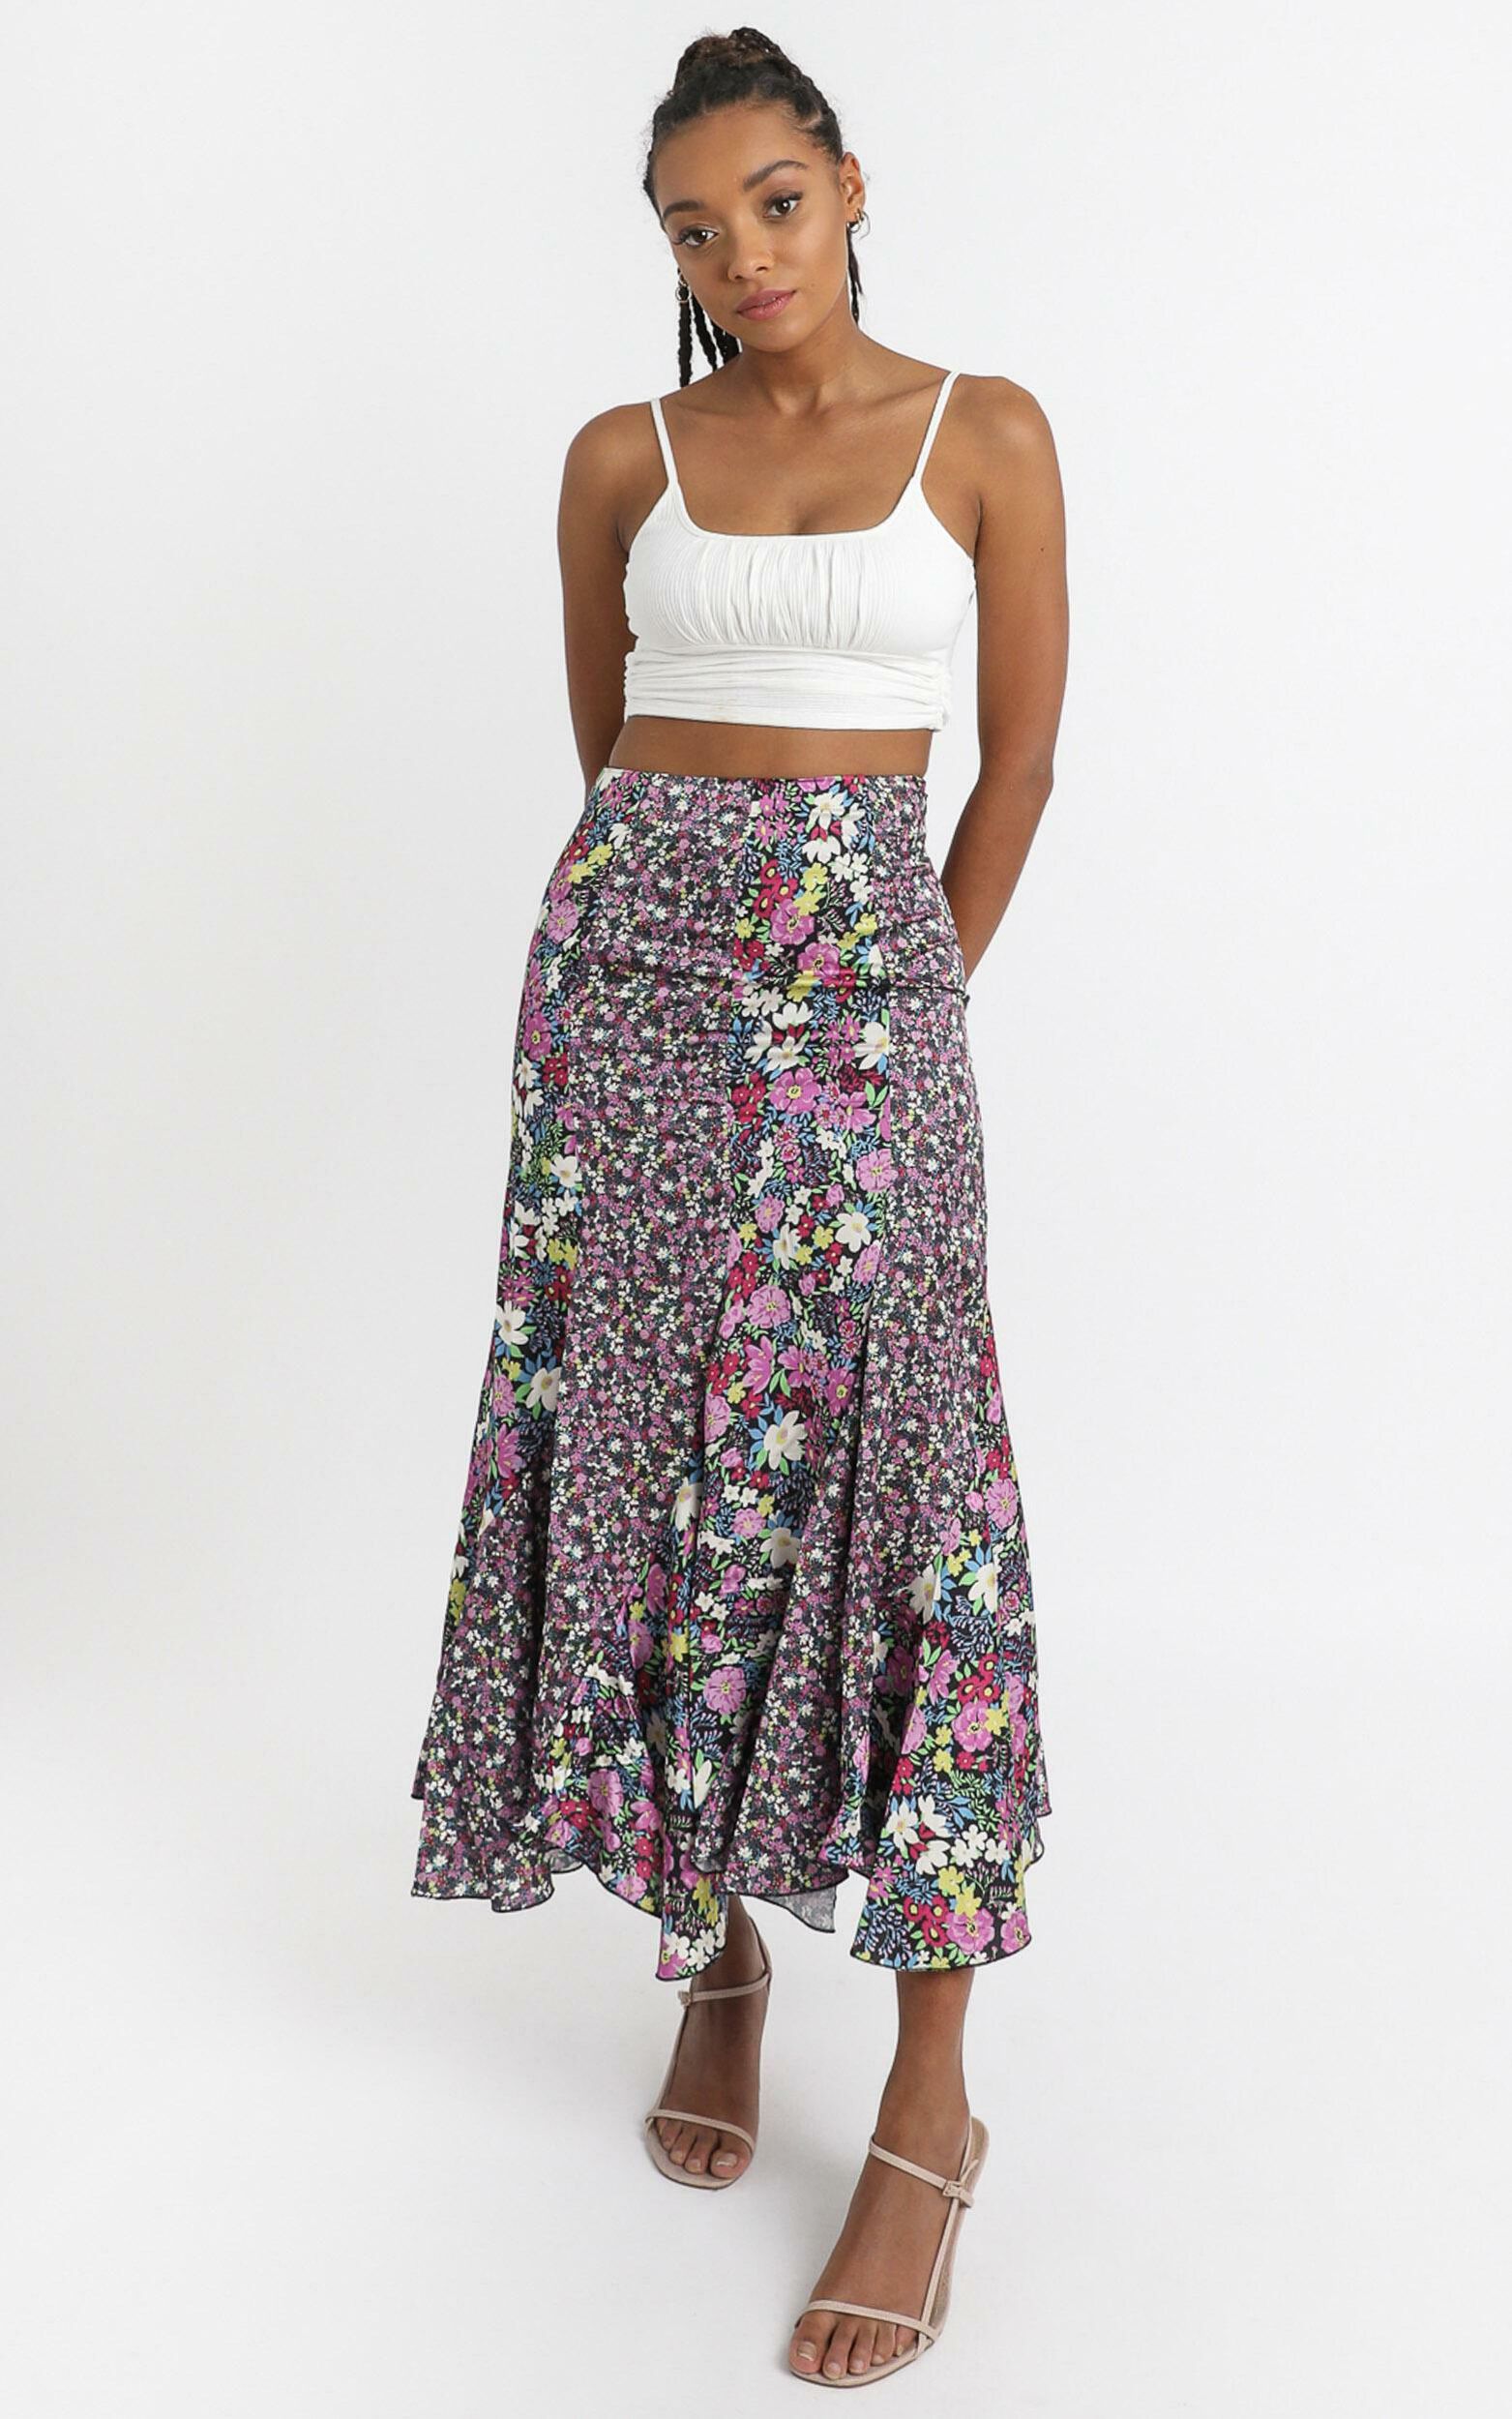 A Fool For You Skirt in Forest Floral | Showpo